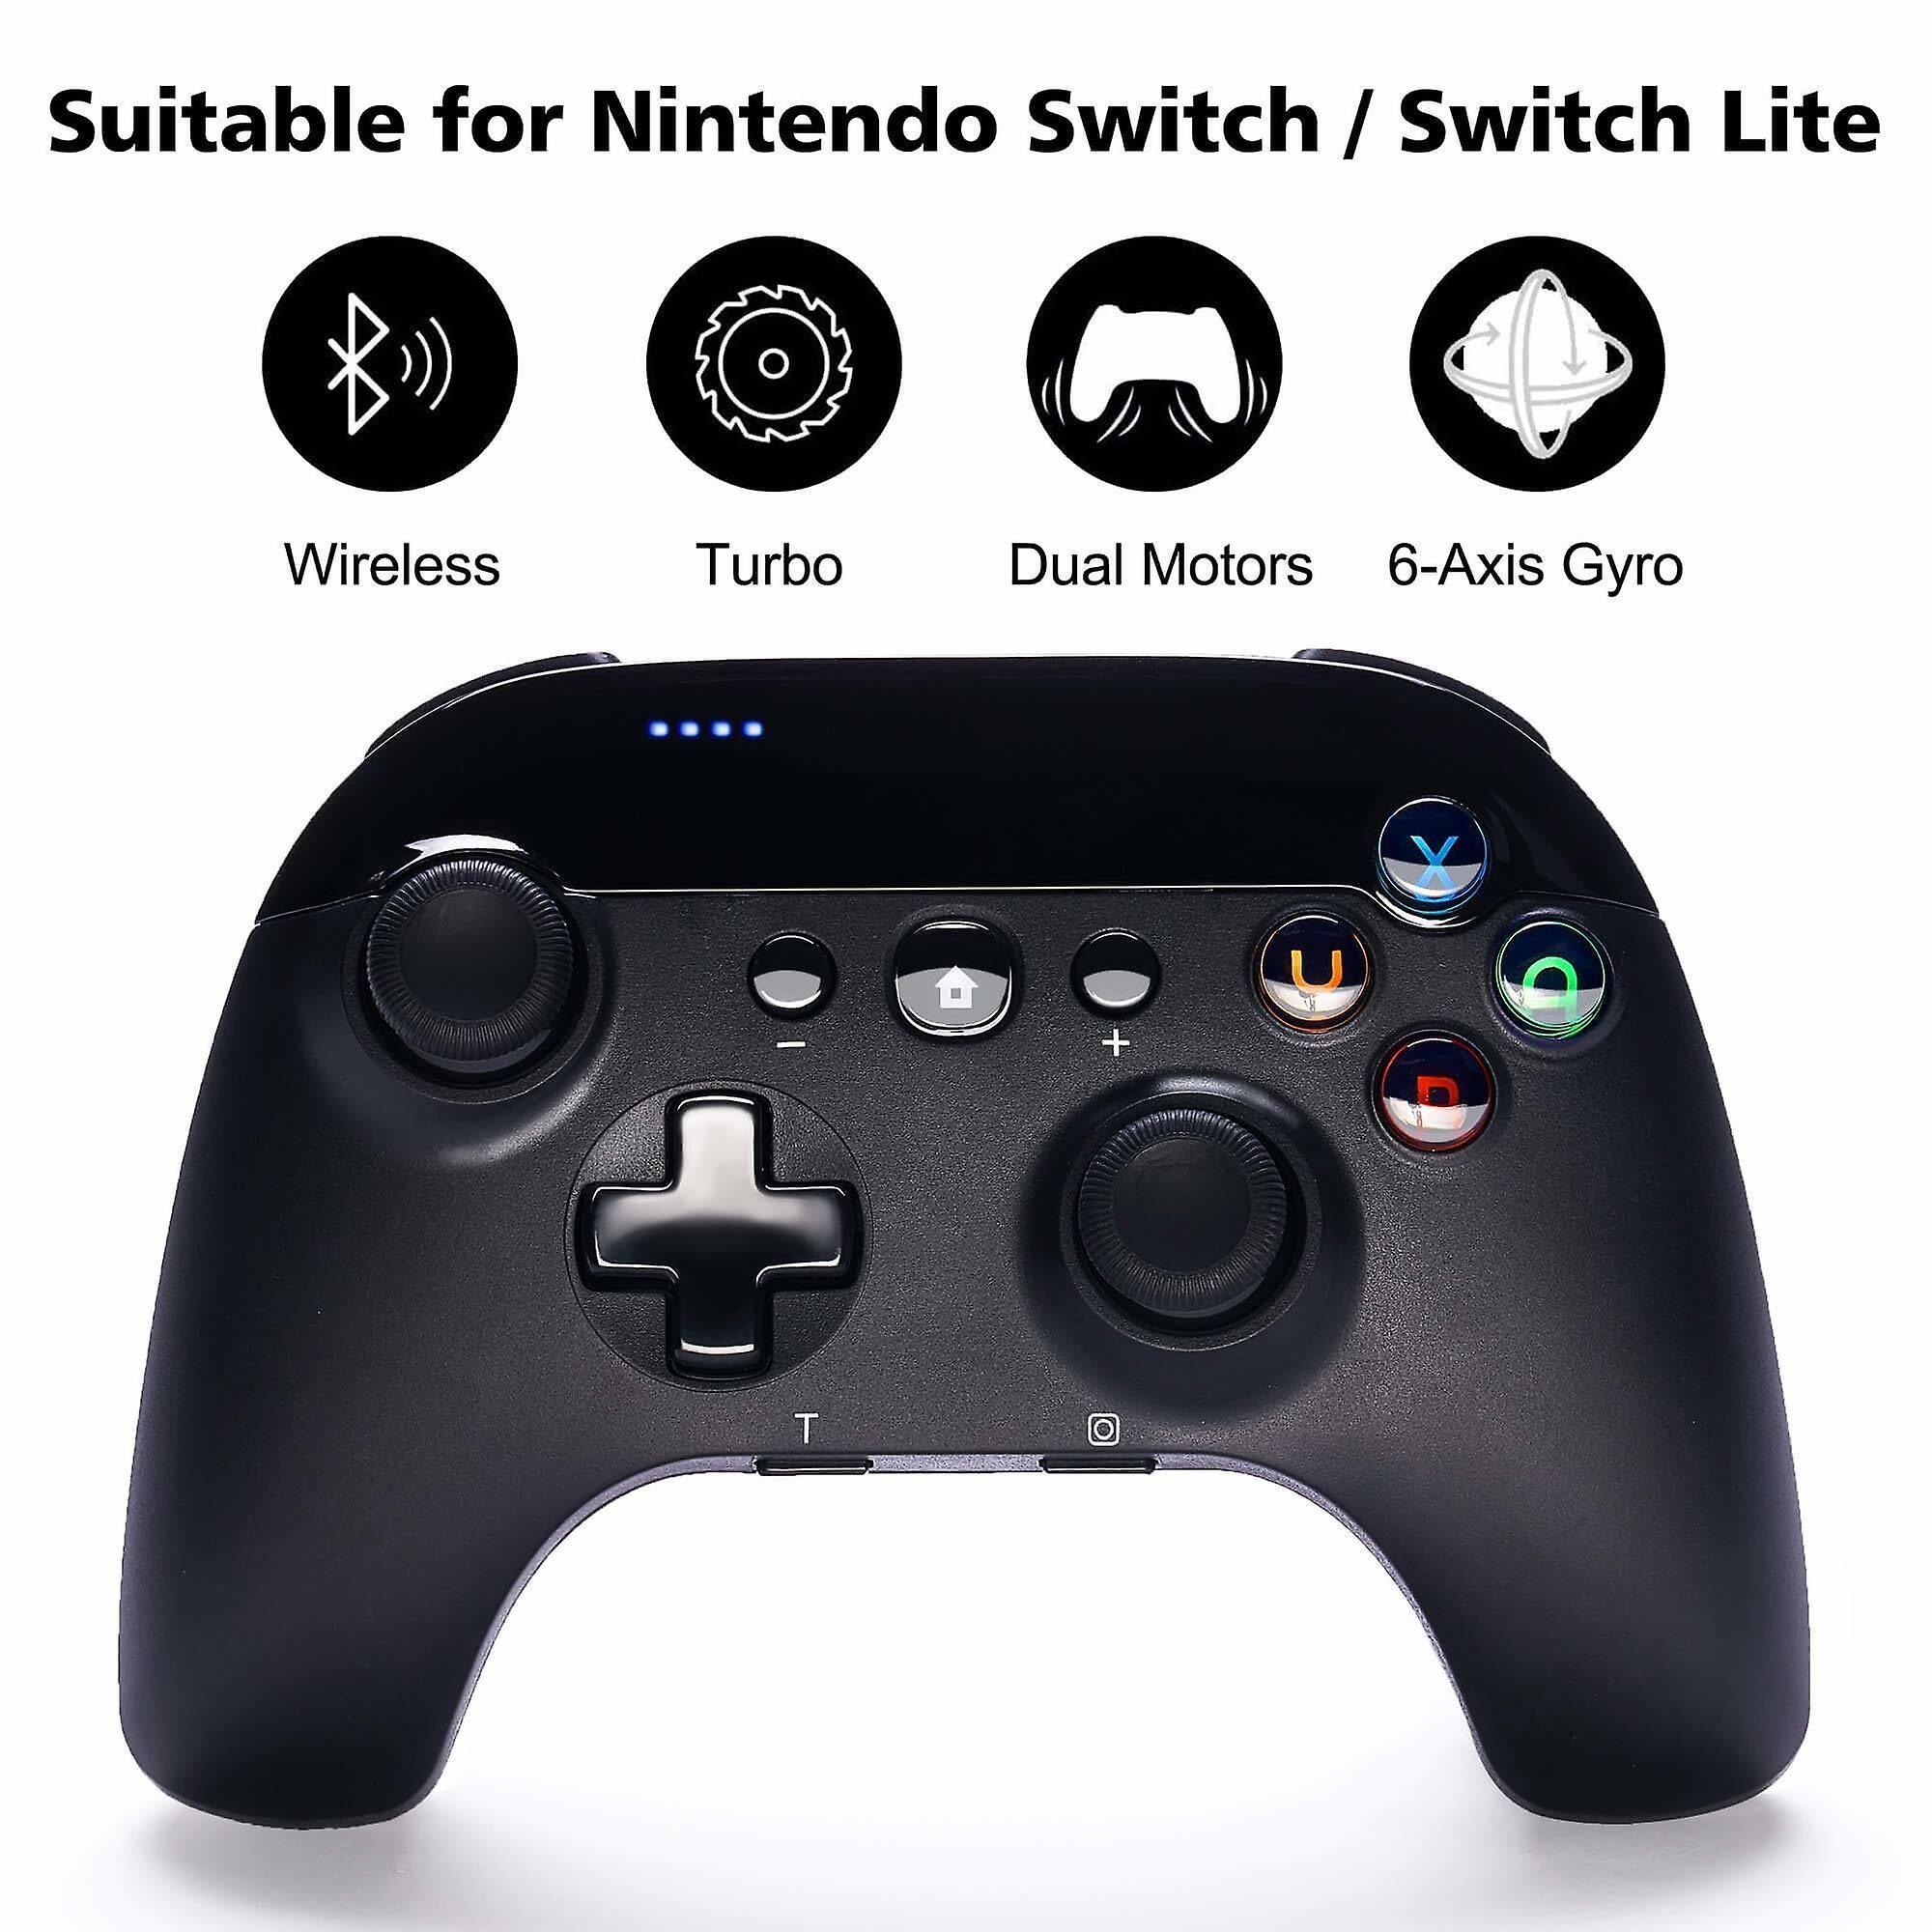 Wireless Controller for Nintendo Switch, Bluetooth Wireless Pro Controller for Switch Lite, Remote Controller Joypad Gamepad with Adjustable Turbo, Dual Motors and 6-Axis Gyroscope(black)